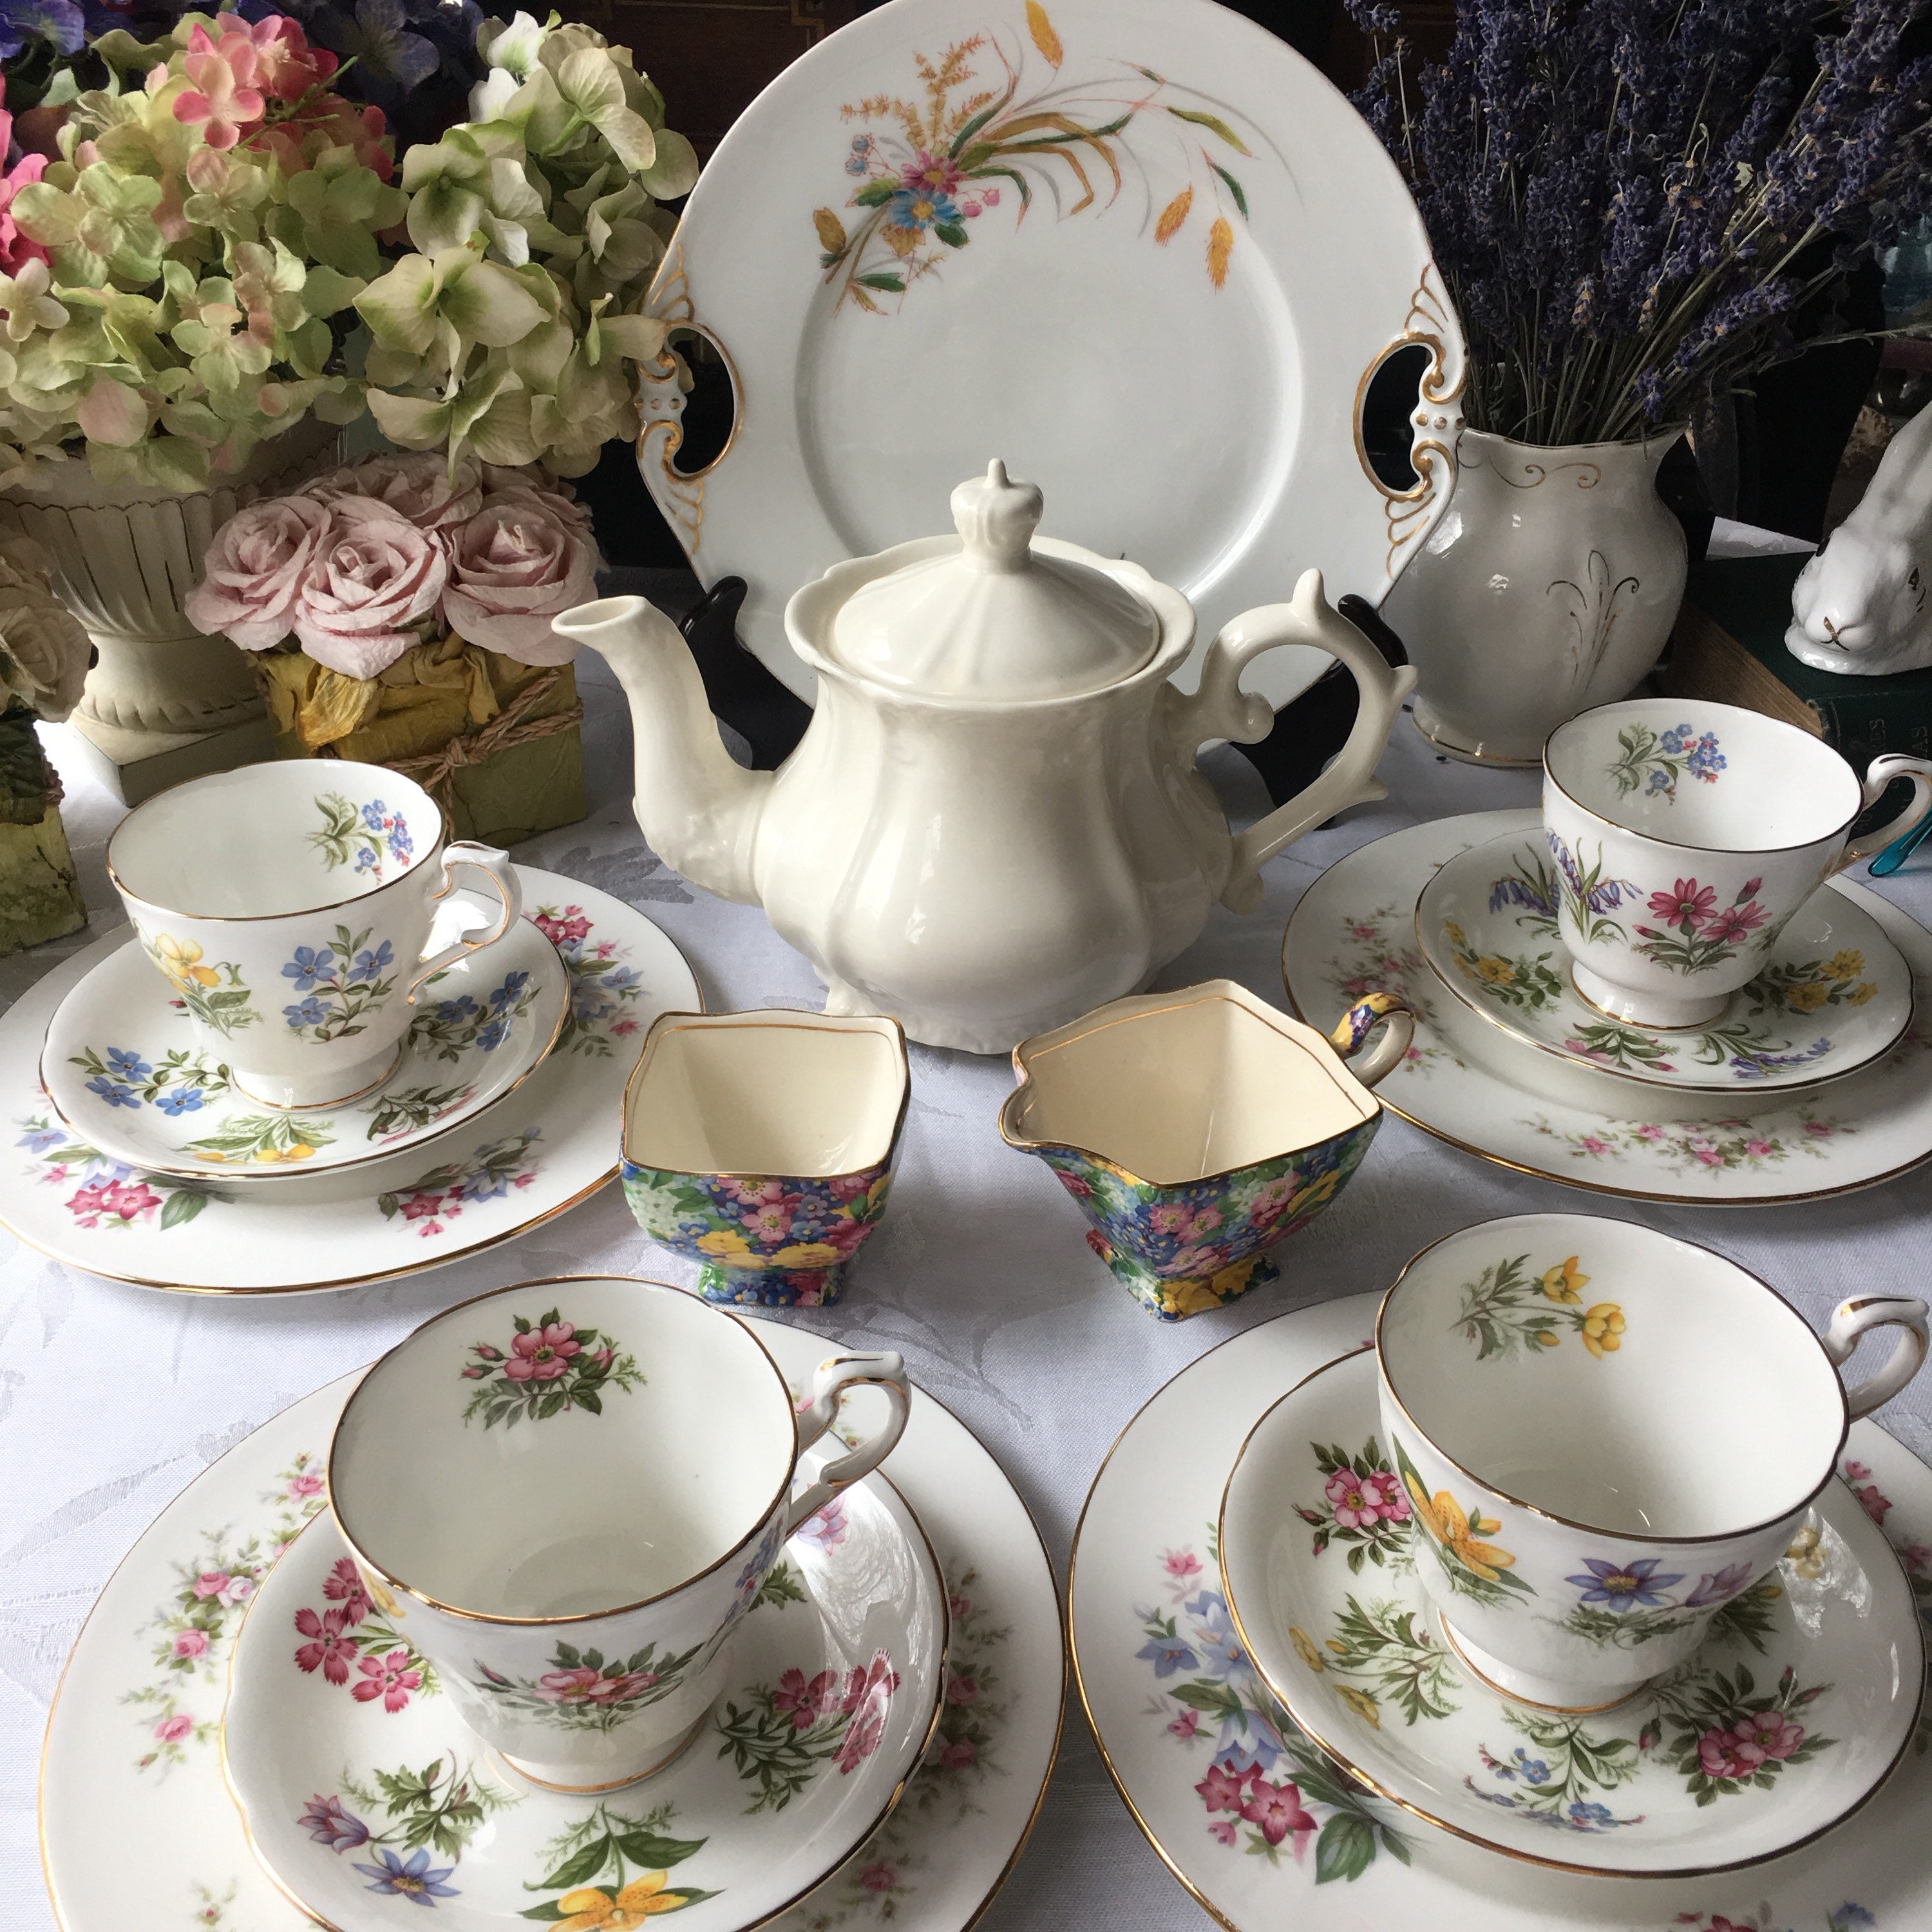 Lovely English Tea Set for 4 Featuring Paragon English